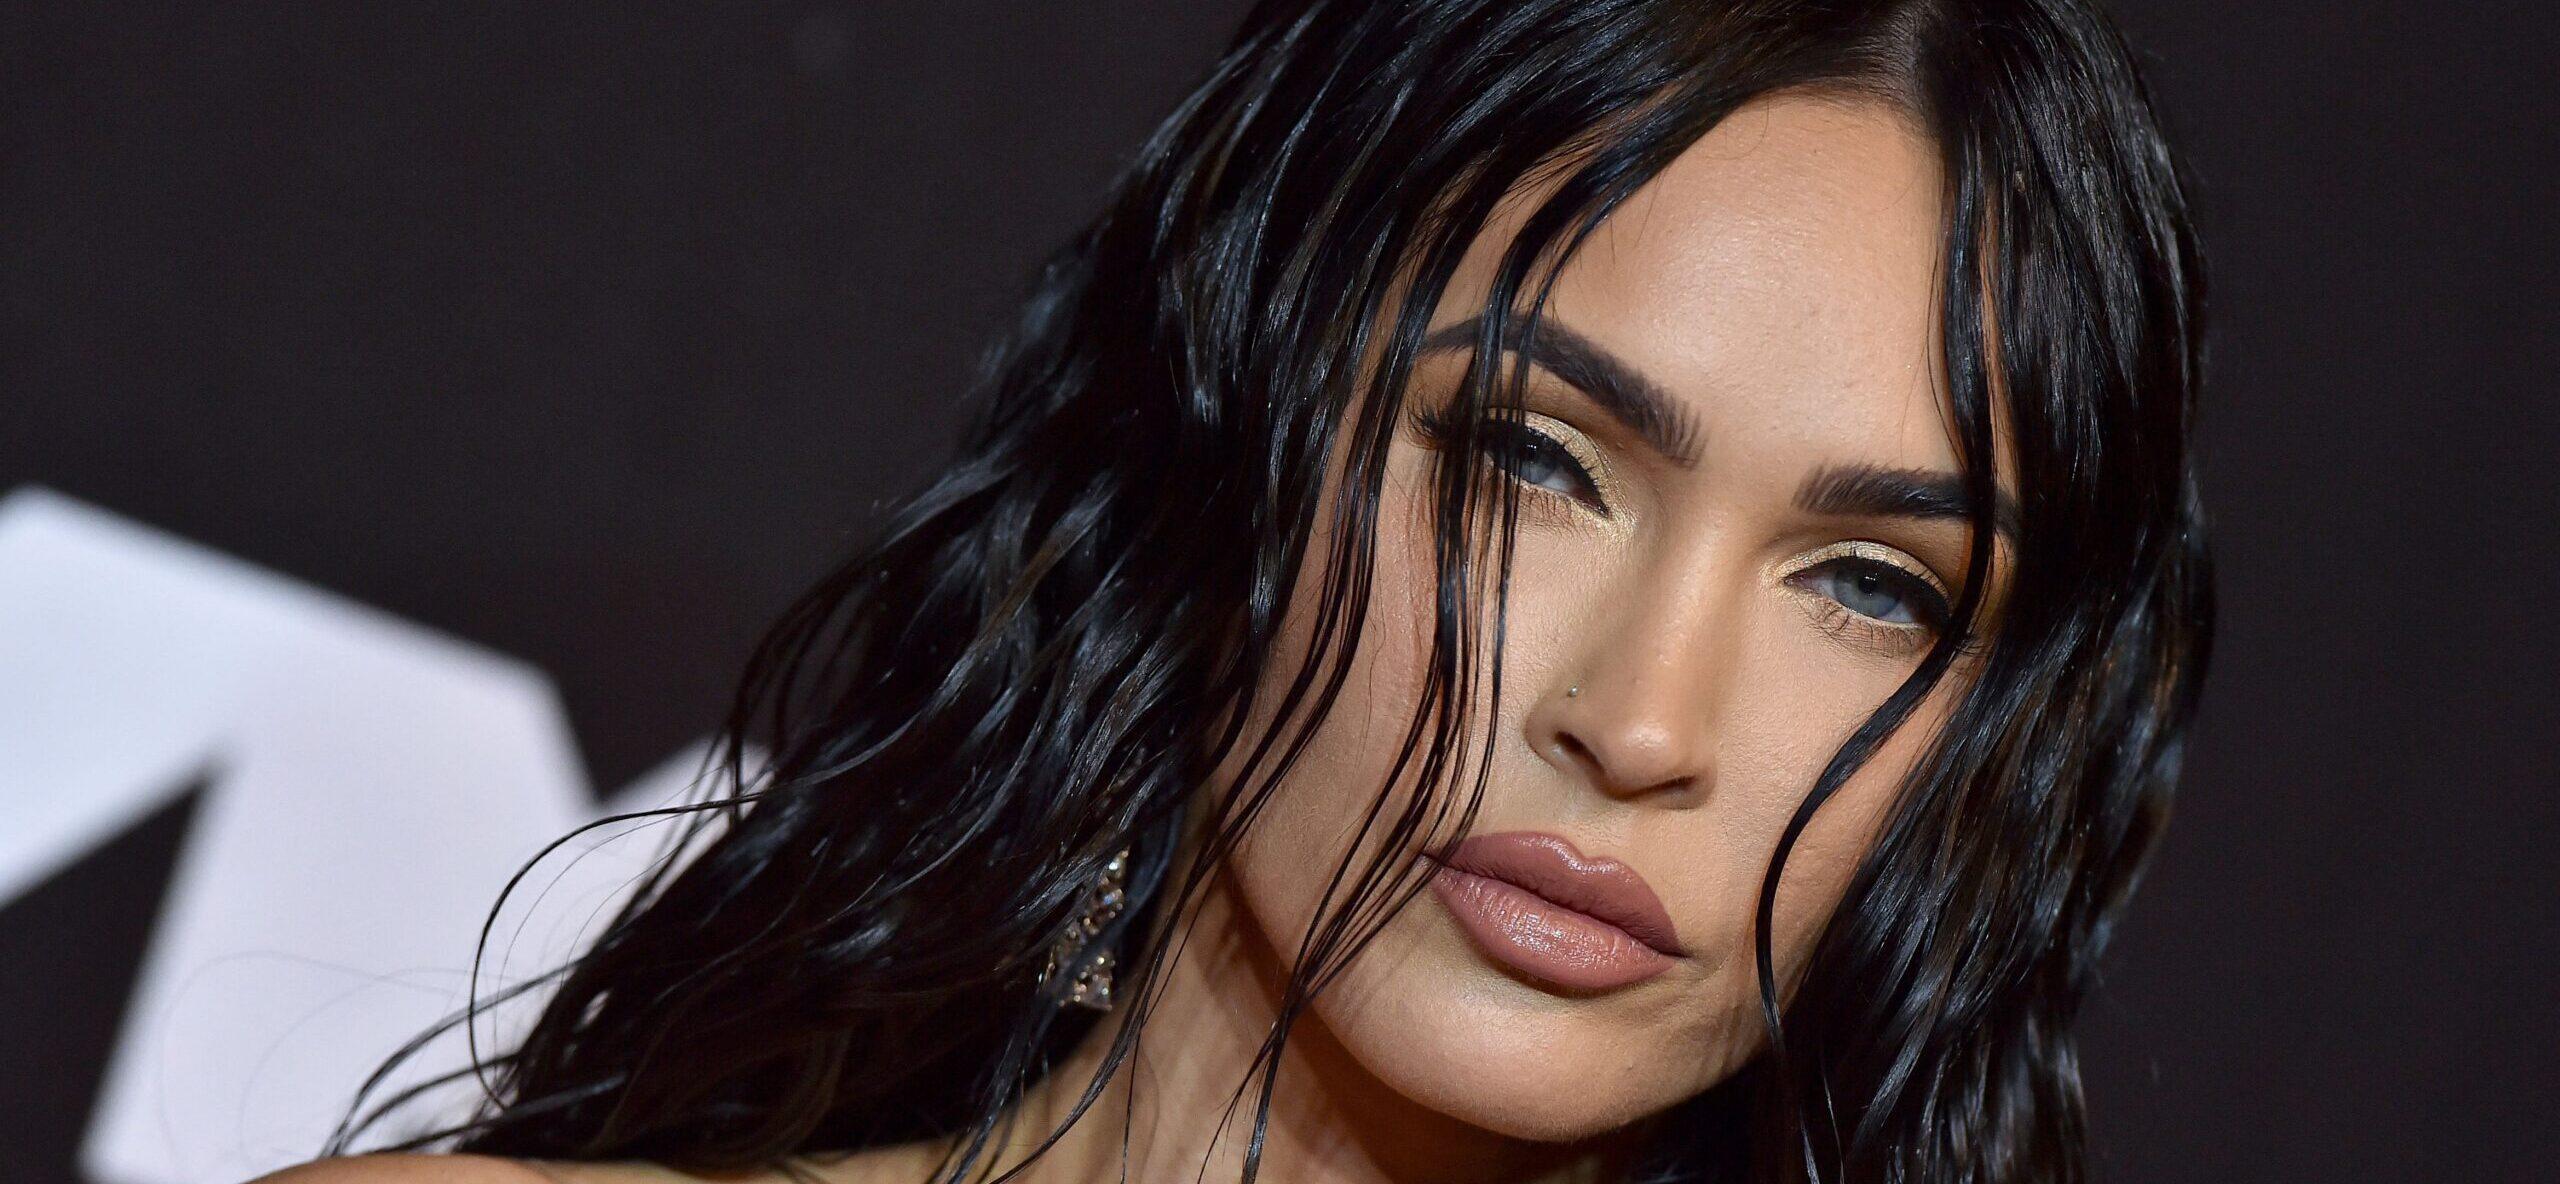 Megan Fox Reveals Her Bra/Implant Size In Candid Interview